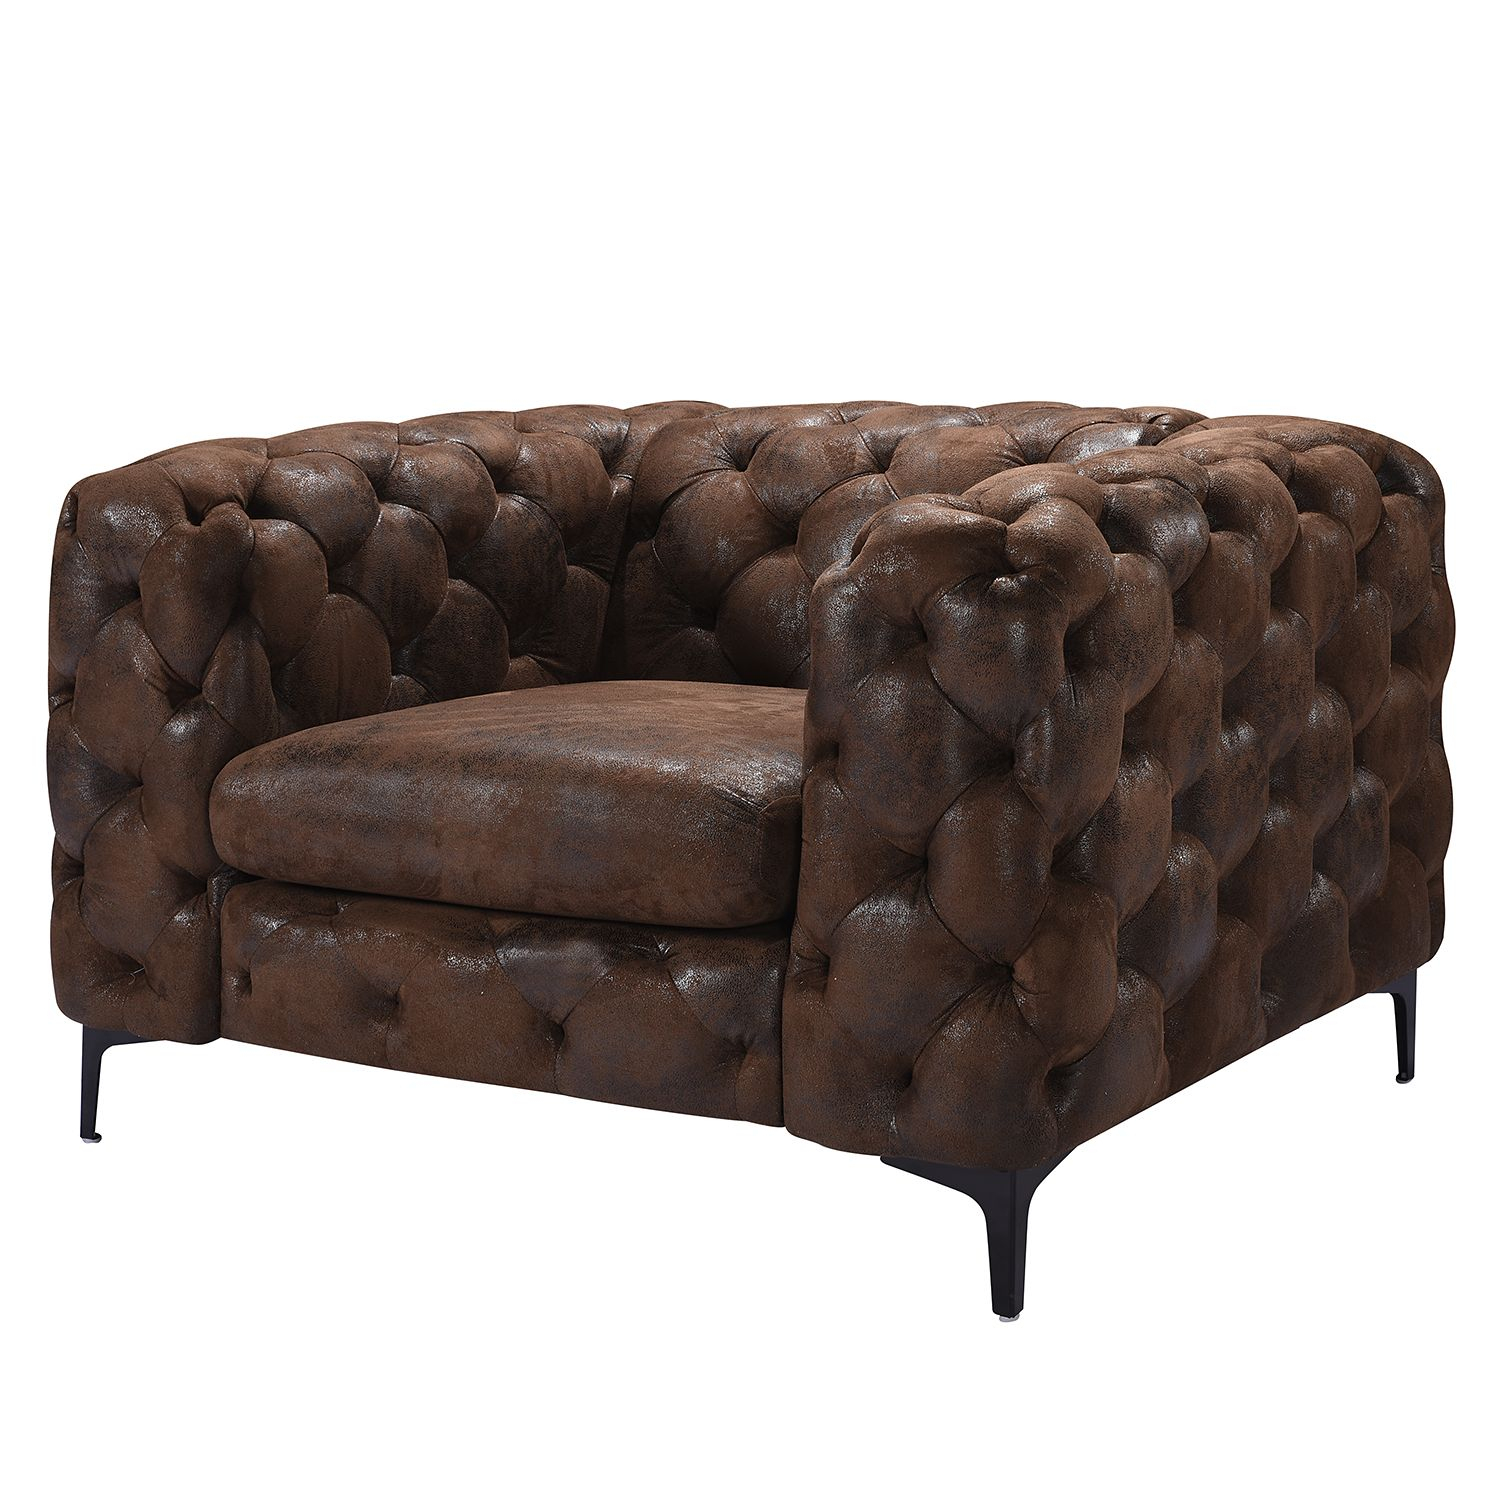 Fauteuil Leominster Ii à Cosco Canap Chesterfield En Cuir